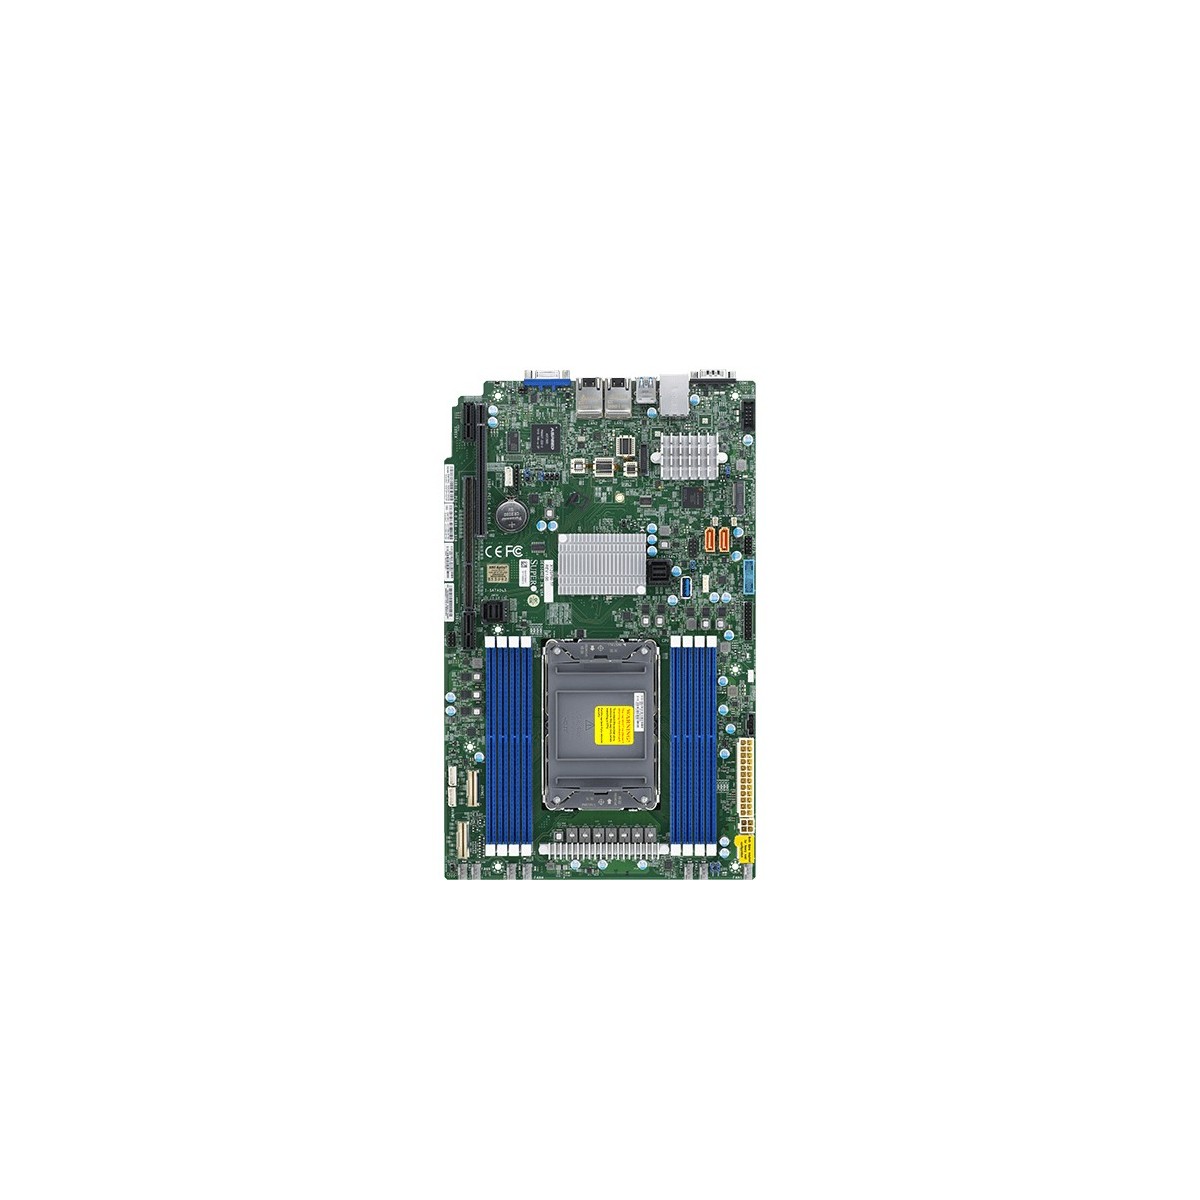 Supermicro Motherboard X12SPW-TF retail pack - Motherboard - Intel Socket P/478 (Core 2 Duo)